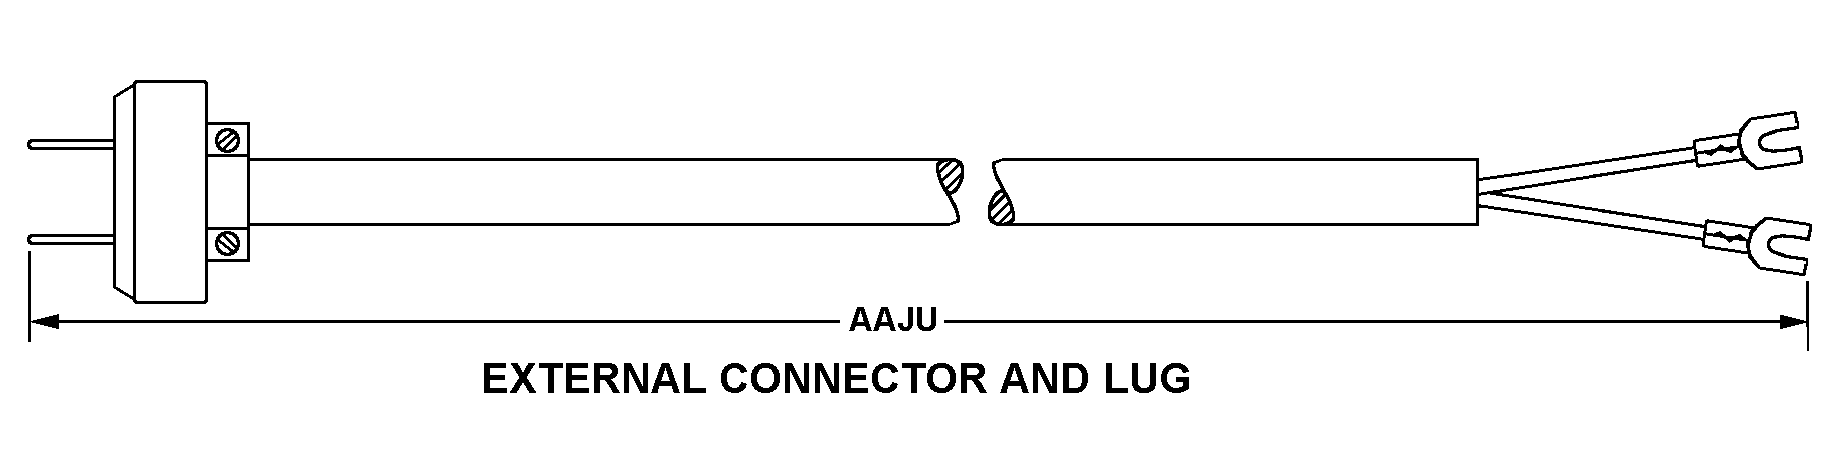 EXTERNAL CONNECTOR AND LUG style nsn 6150-01-371-0280